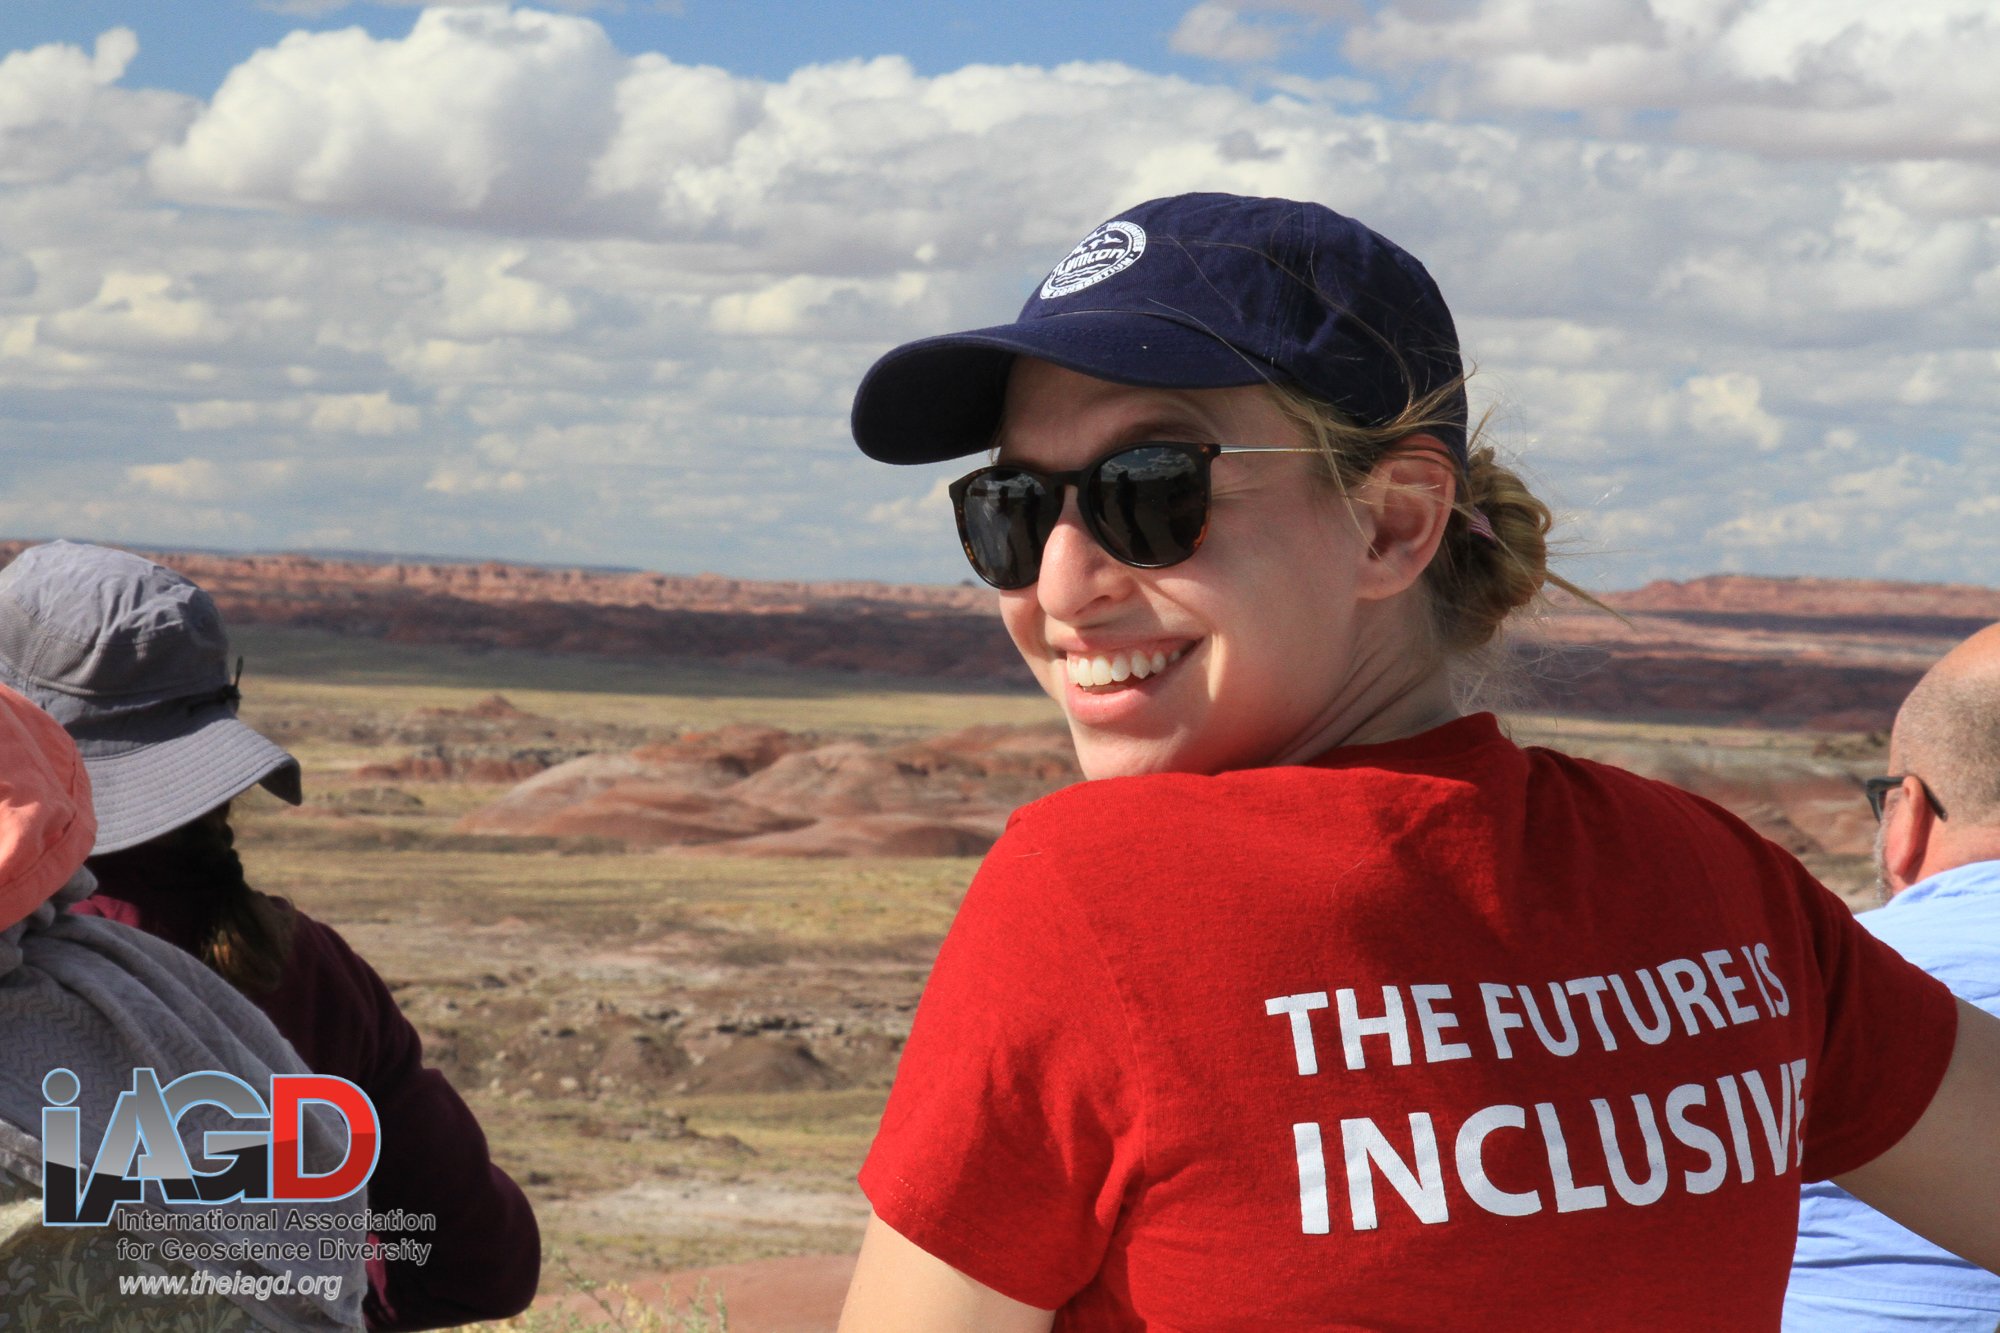 a woman wearing a hat and sunglasses is turning around to the left. her shirt says "the future is inclusive."